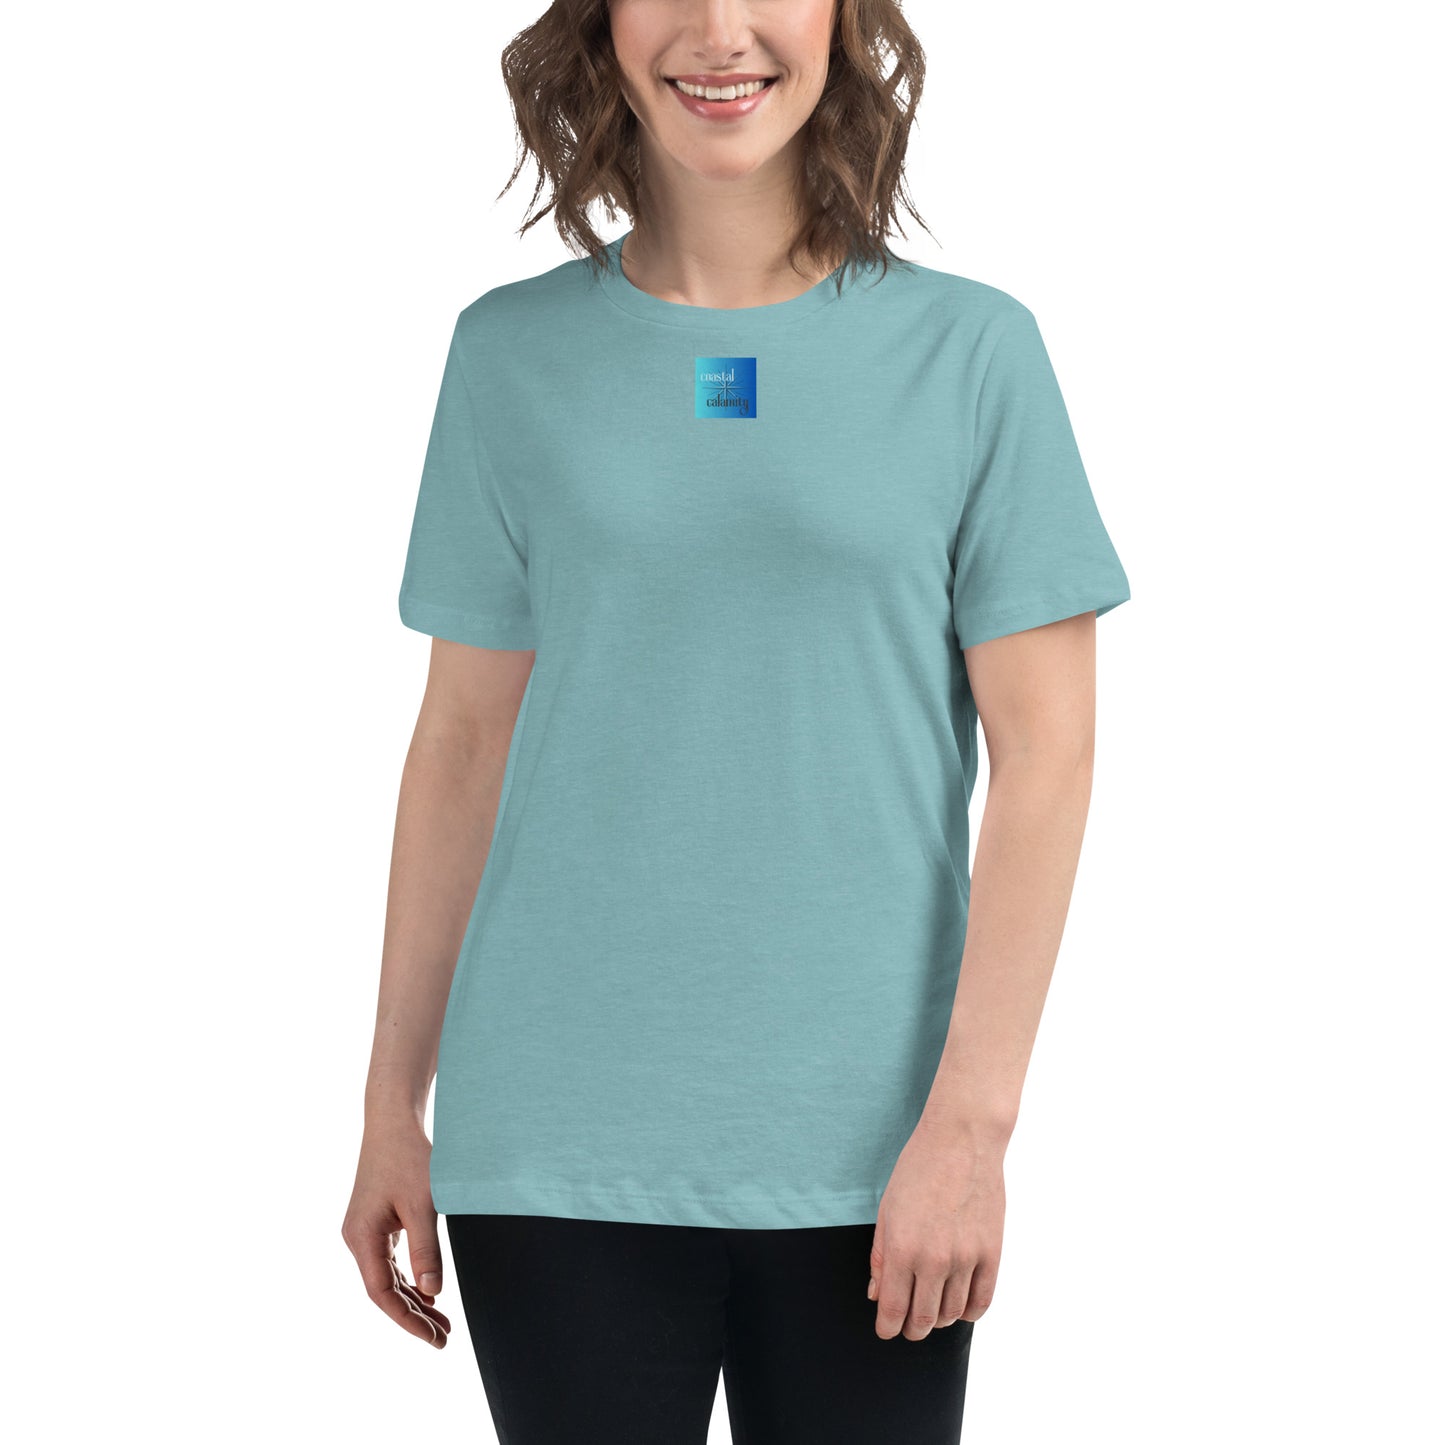 Fins Up! Women's Relaxed Color Choice Tee